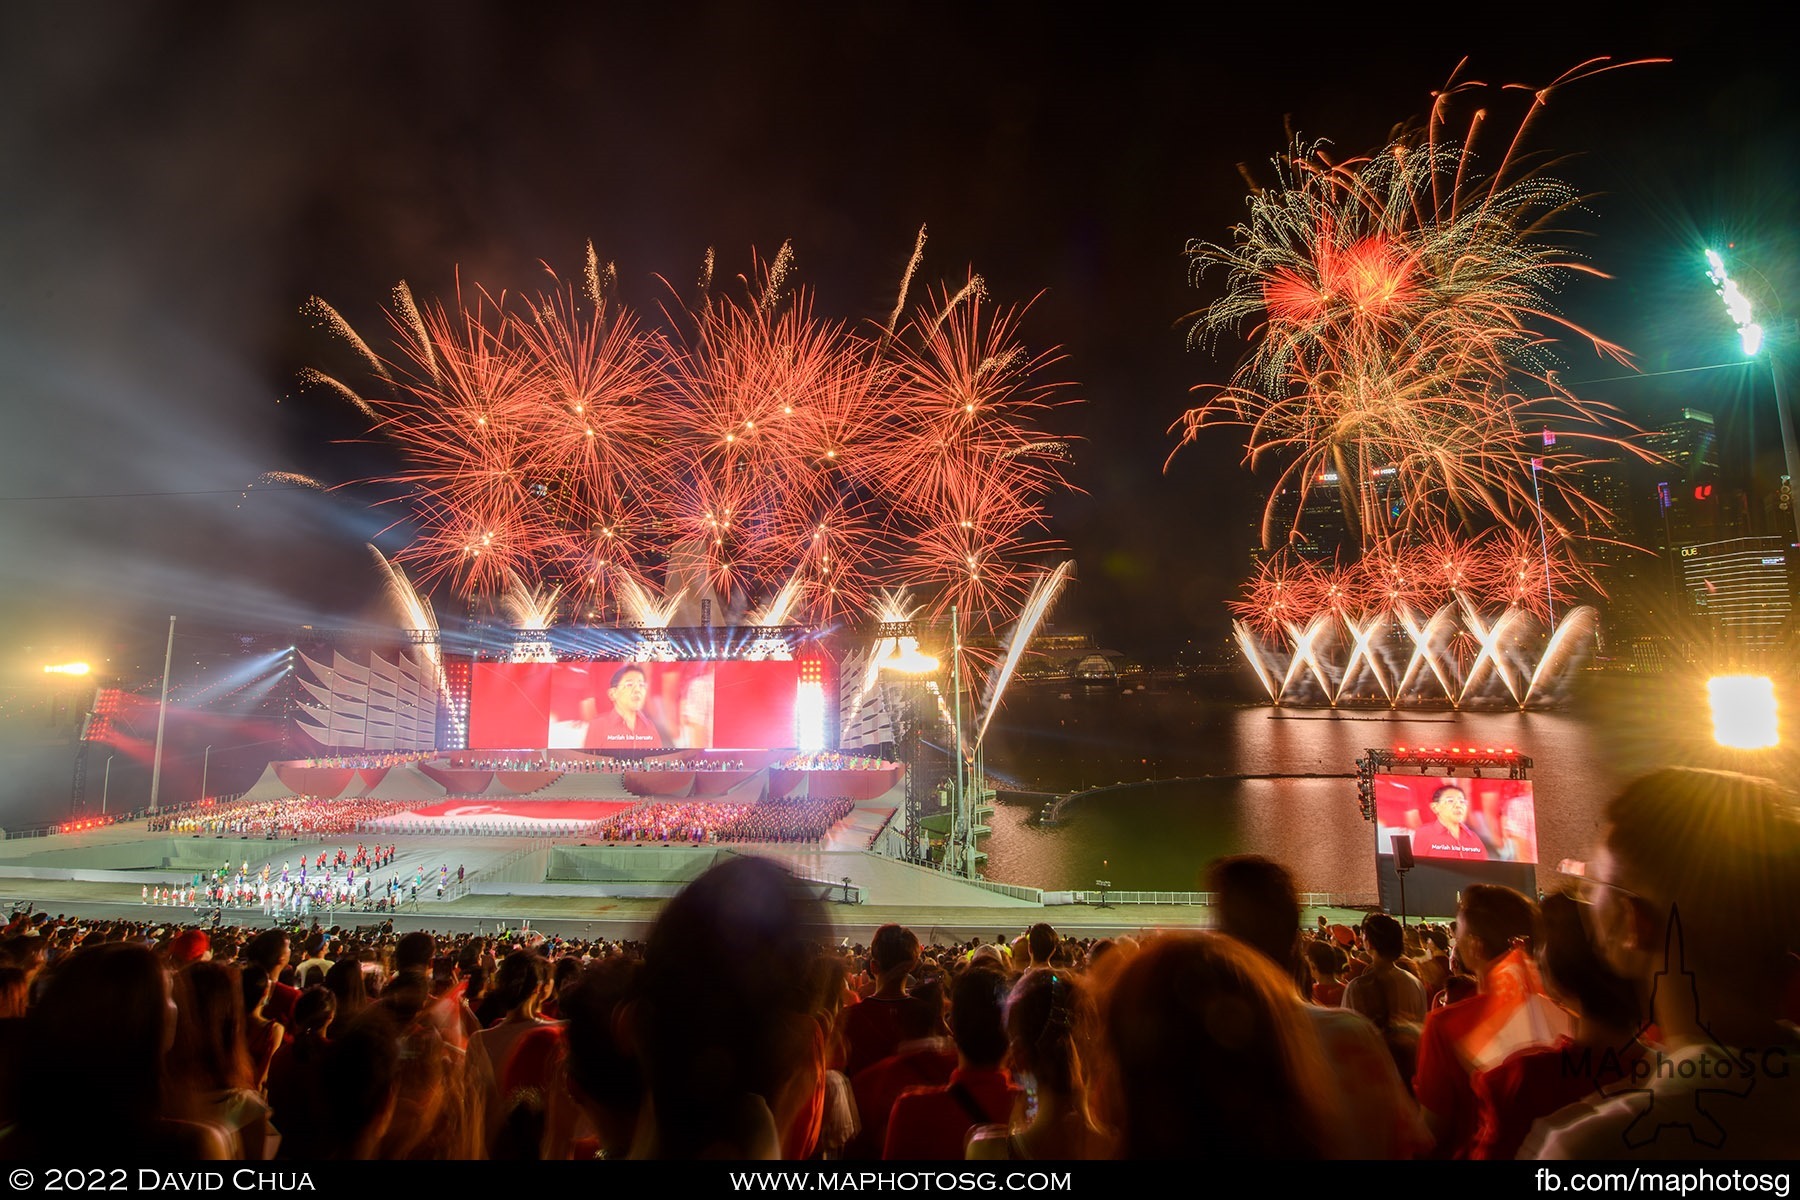 Fireworks burst all around as Mahjulah Singapura was sang at the end of the show